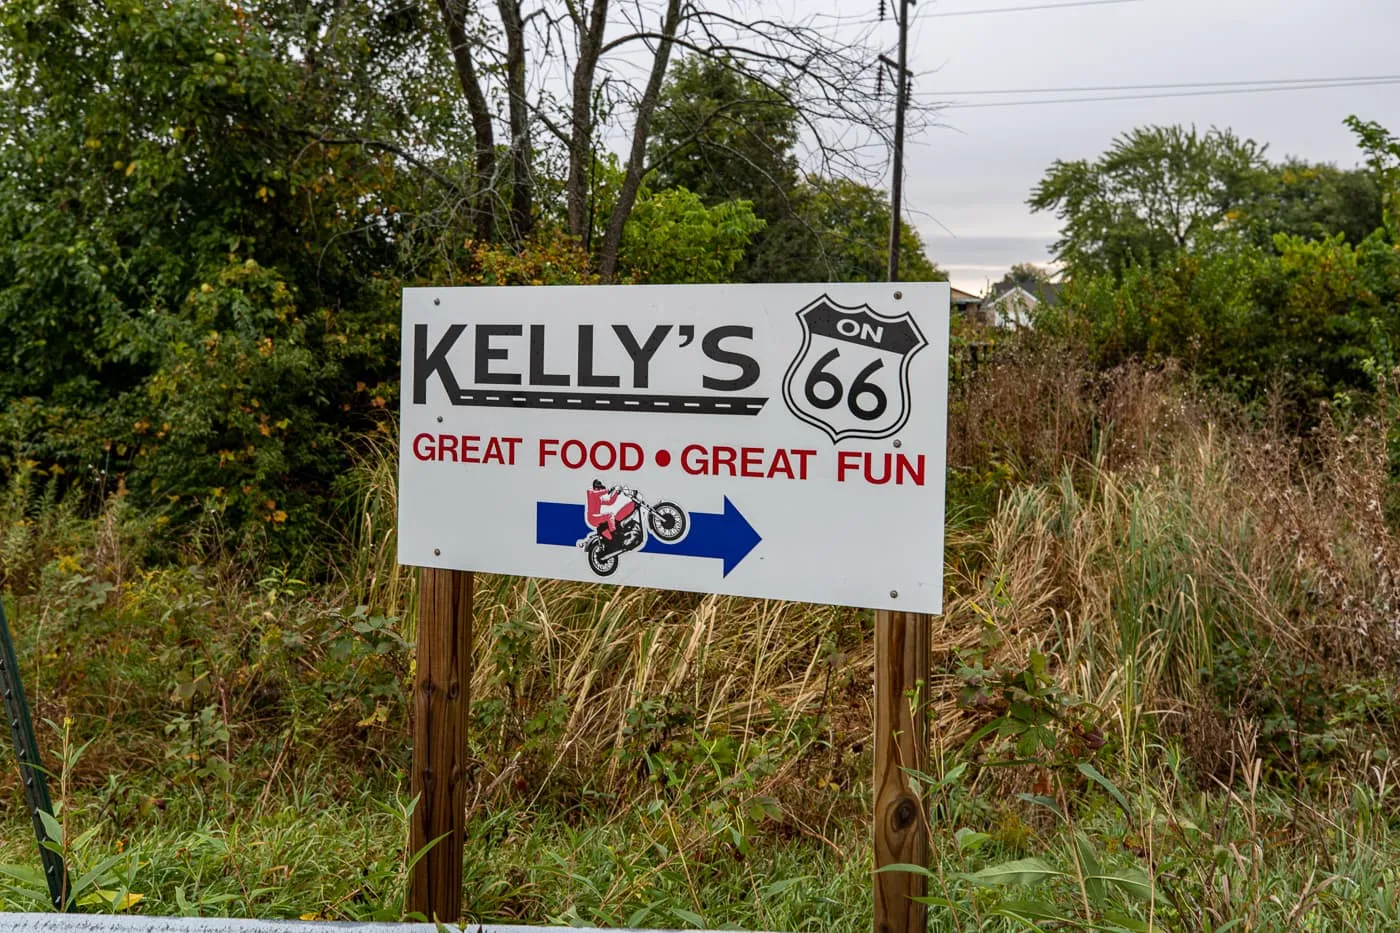 Kelly's on 66 Great Food, Great Fun sign at Route 66 Memory Lane in Lexington, Illinois